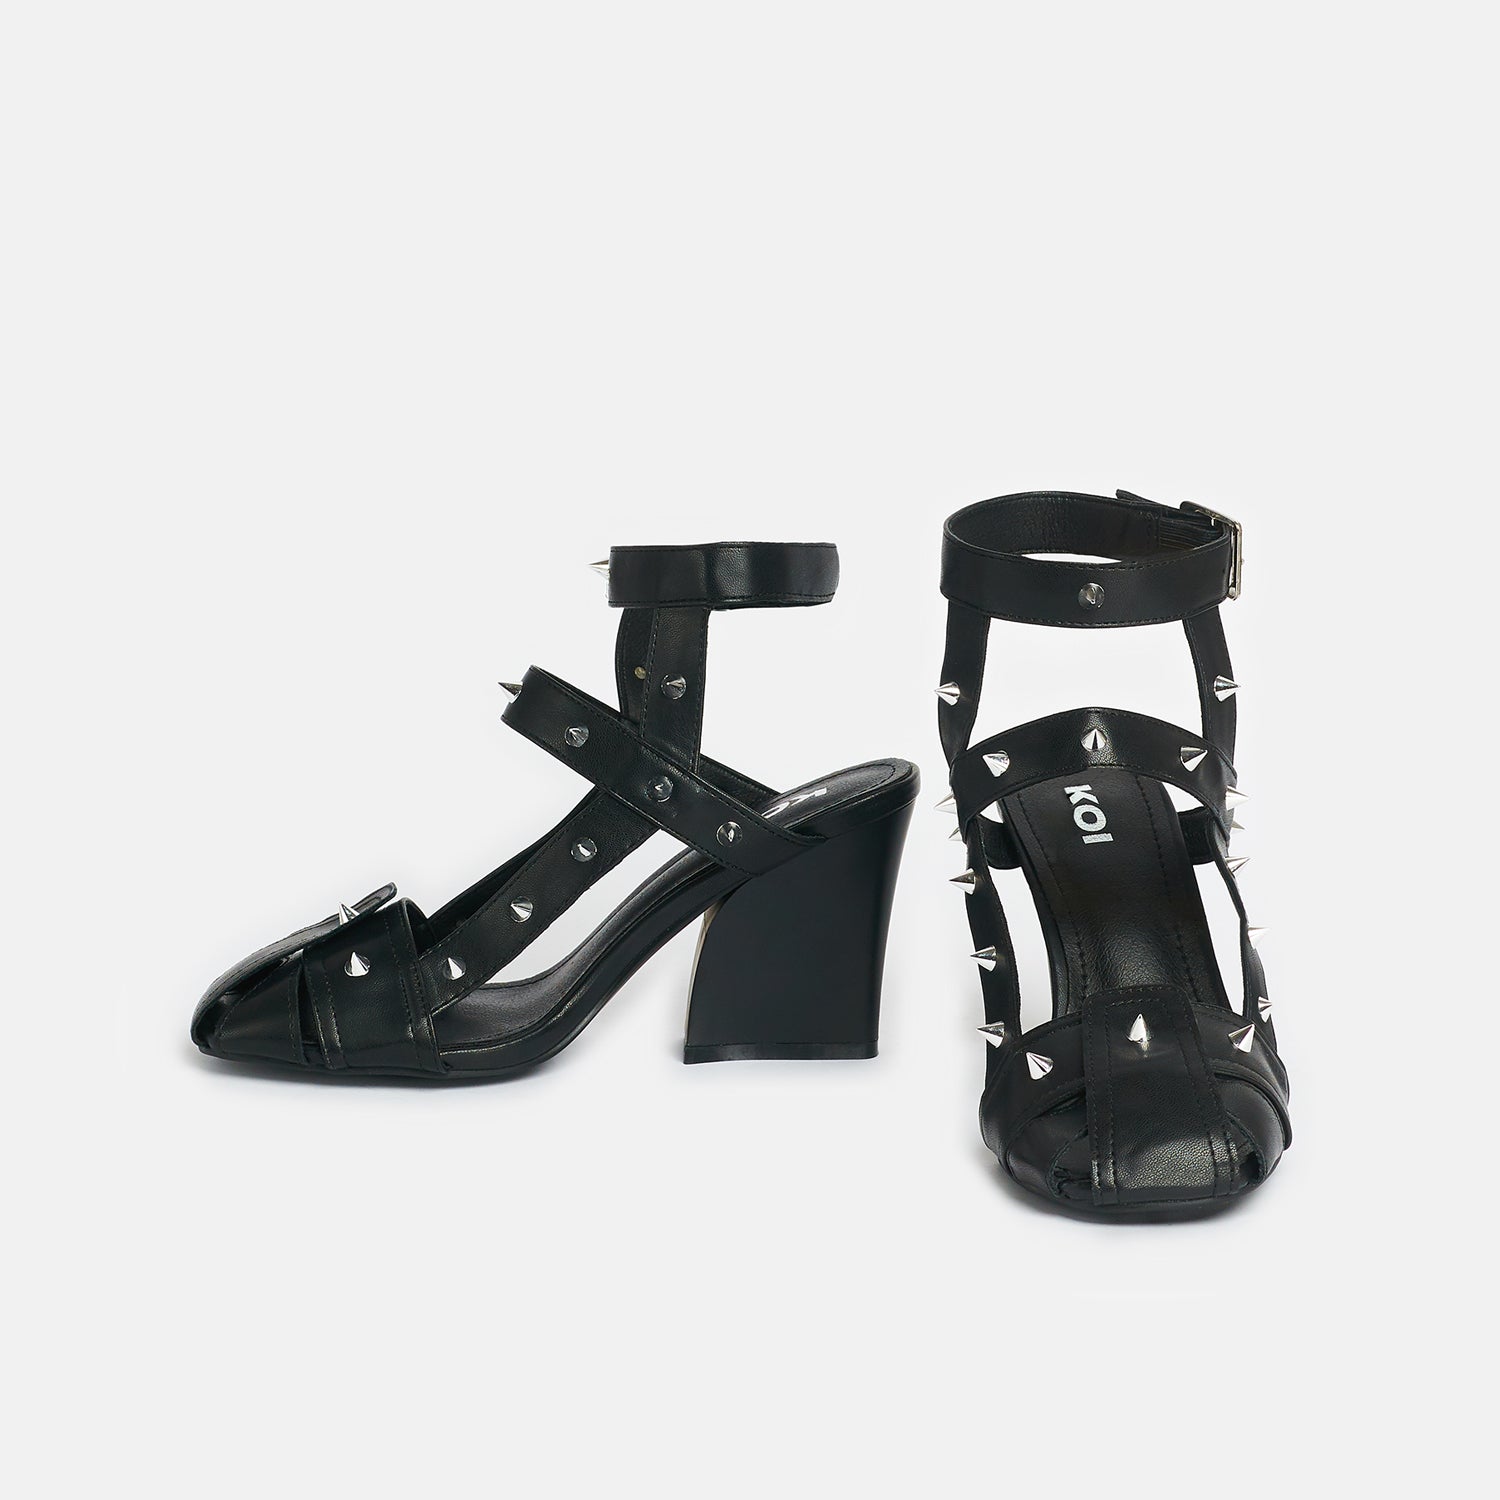 Chaos Blades Strappy Heels - shoes - KOI Footwear - Black - Side and Front View